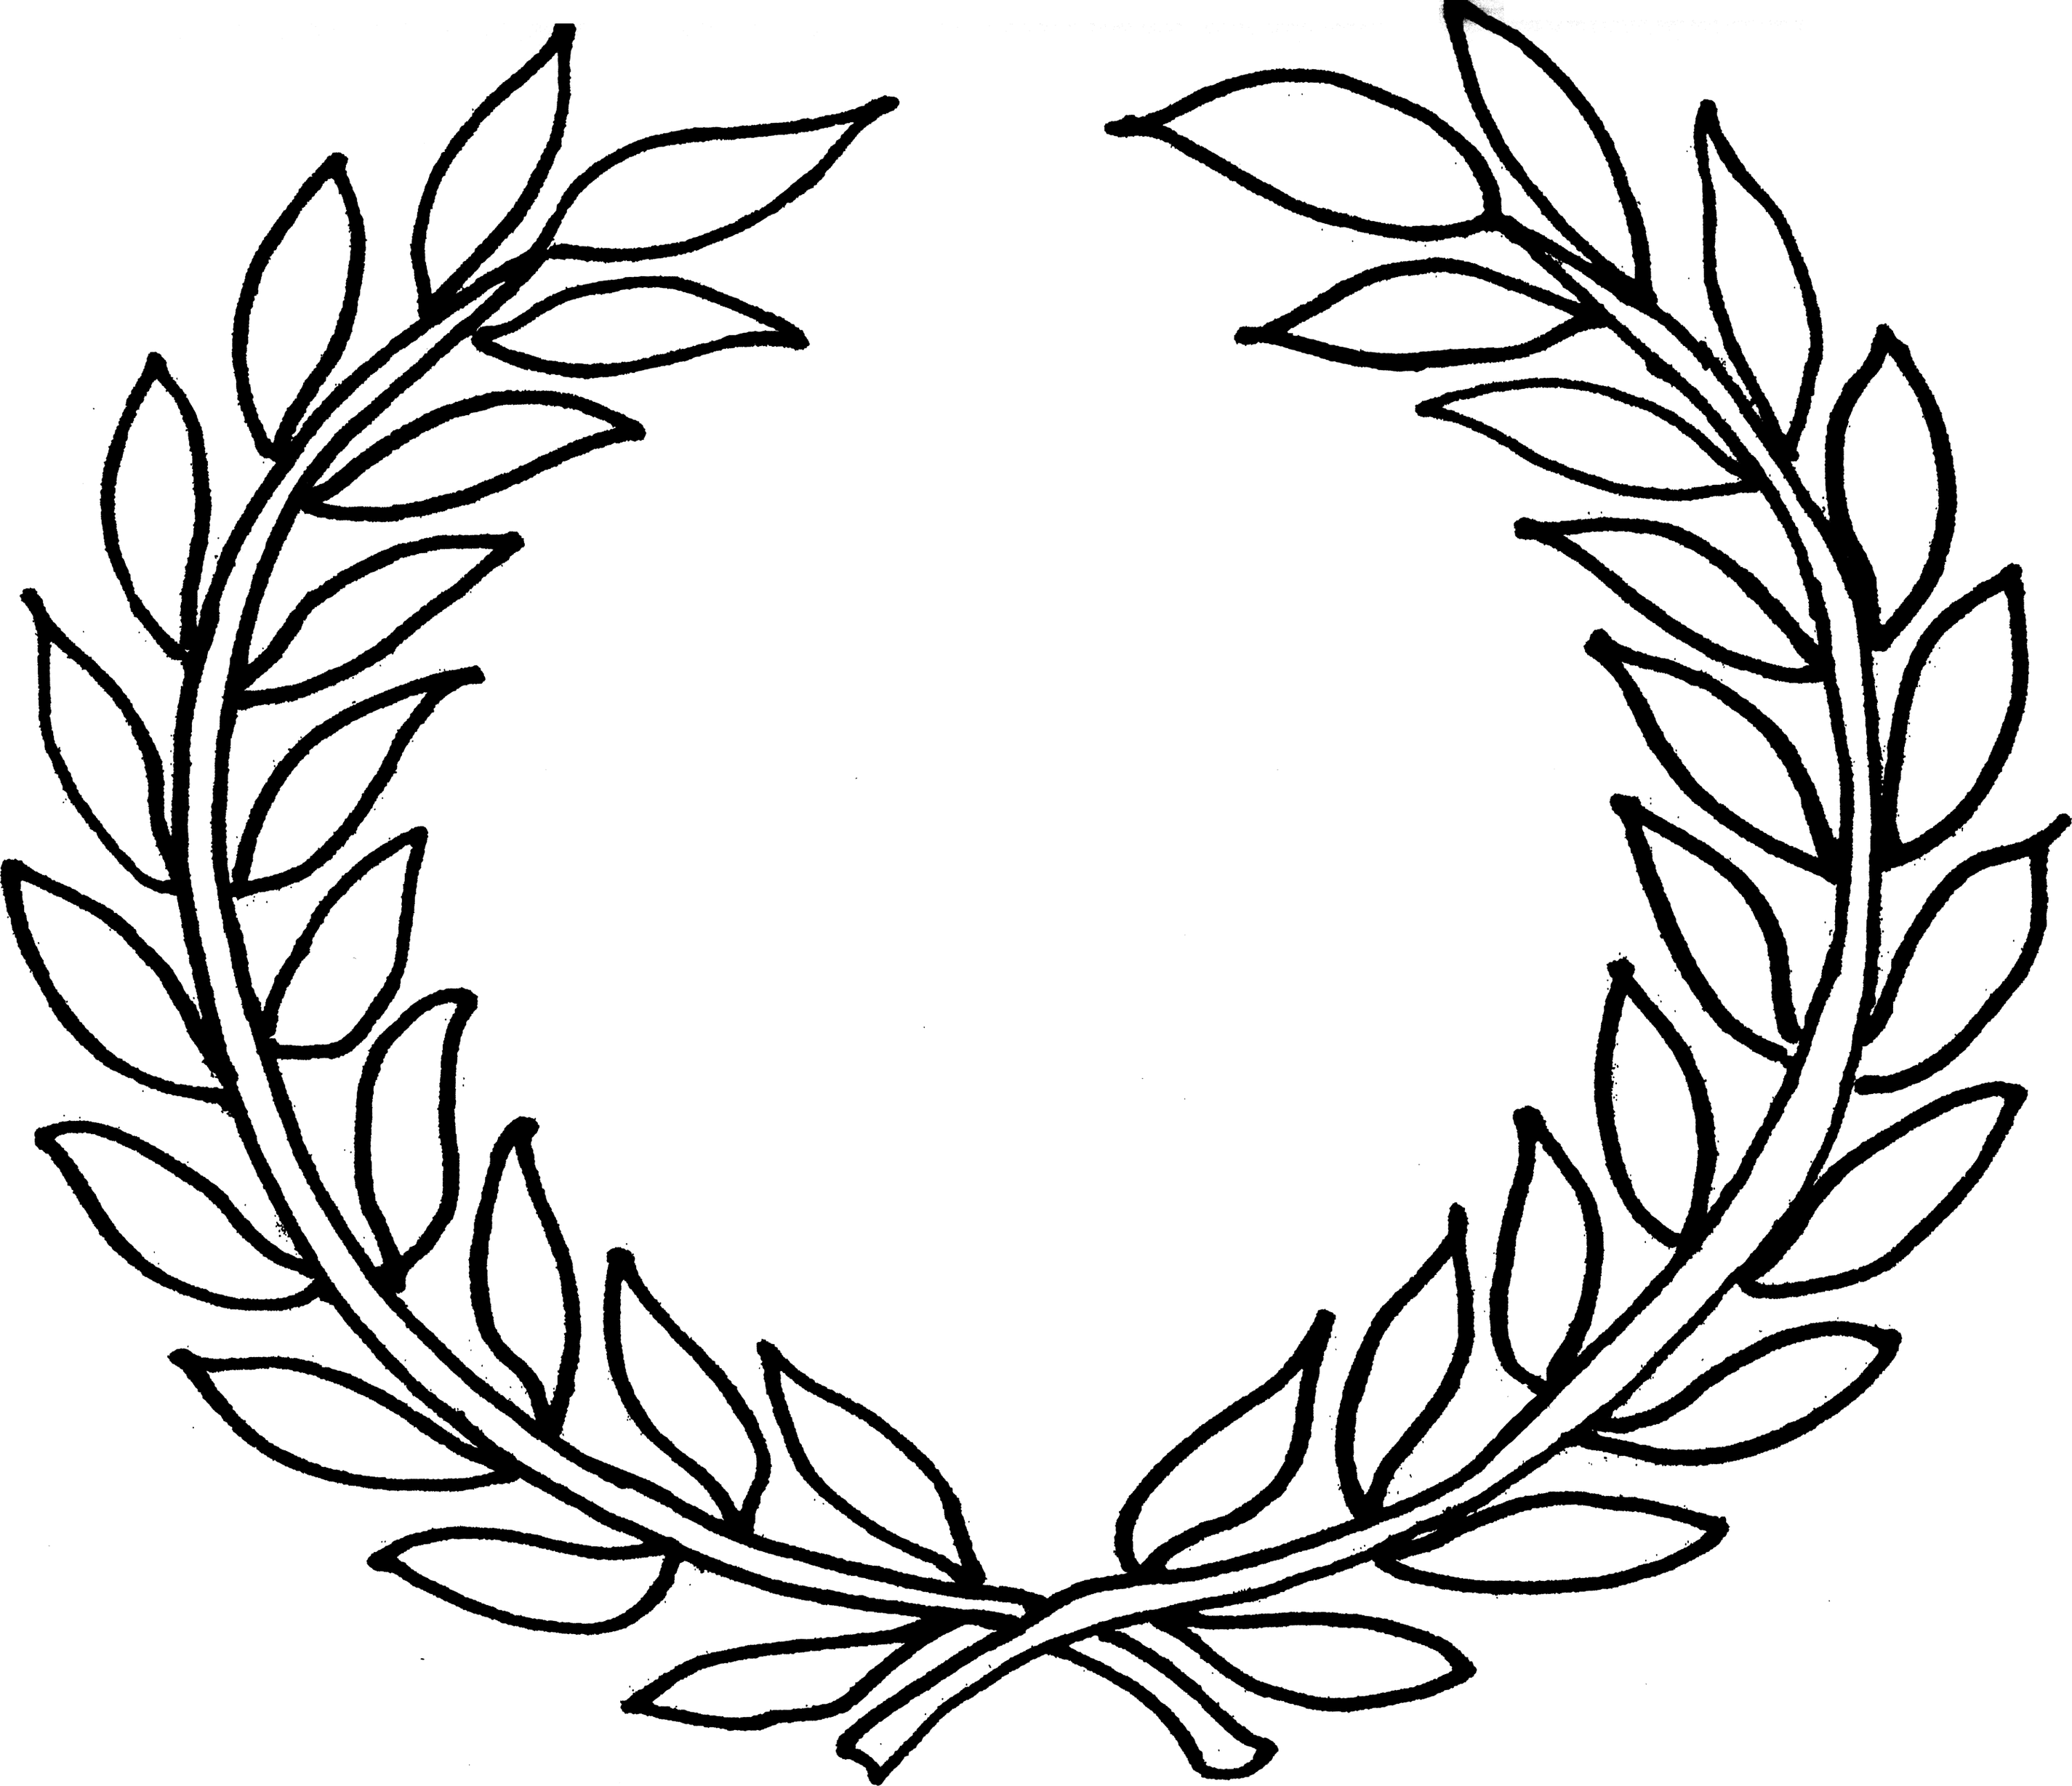 Laurel Leaf Border Clipart - Free to use Clip Art Resource